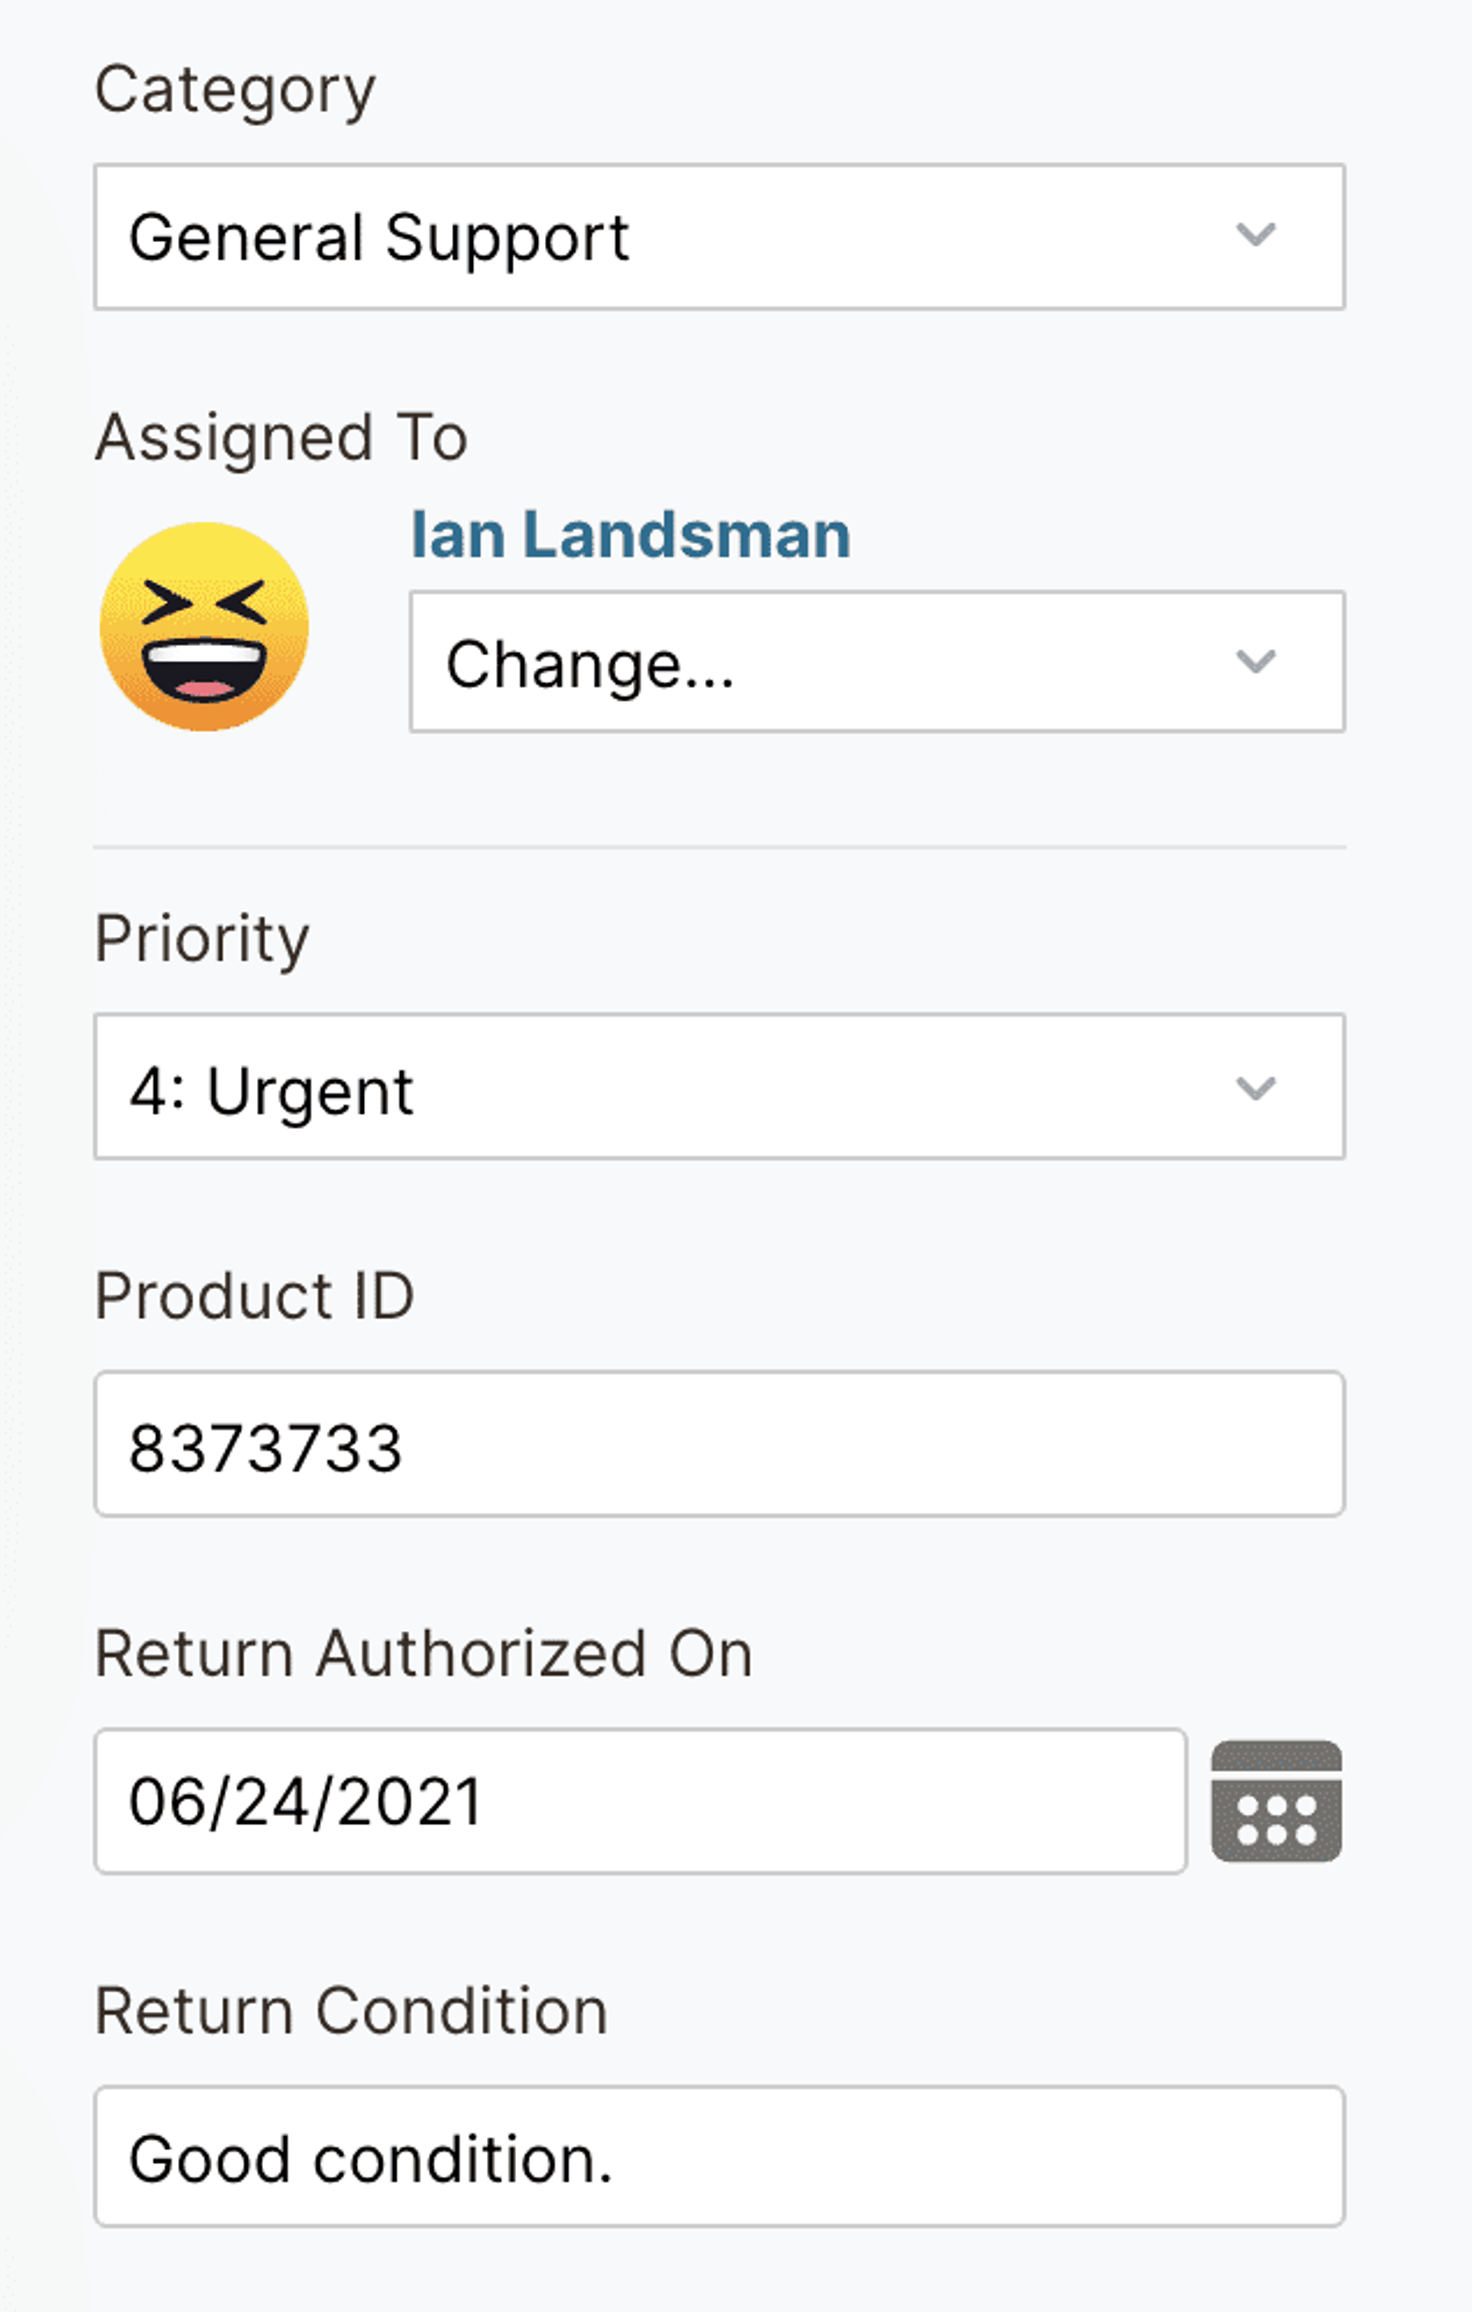 HelpSpot Category, Assigned To, Priority, Product ID, Return Condition